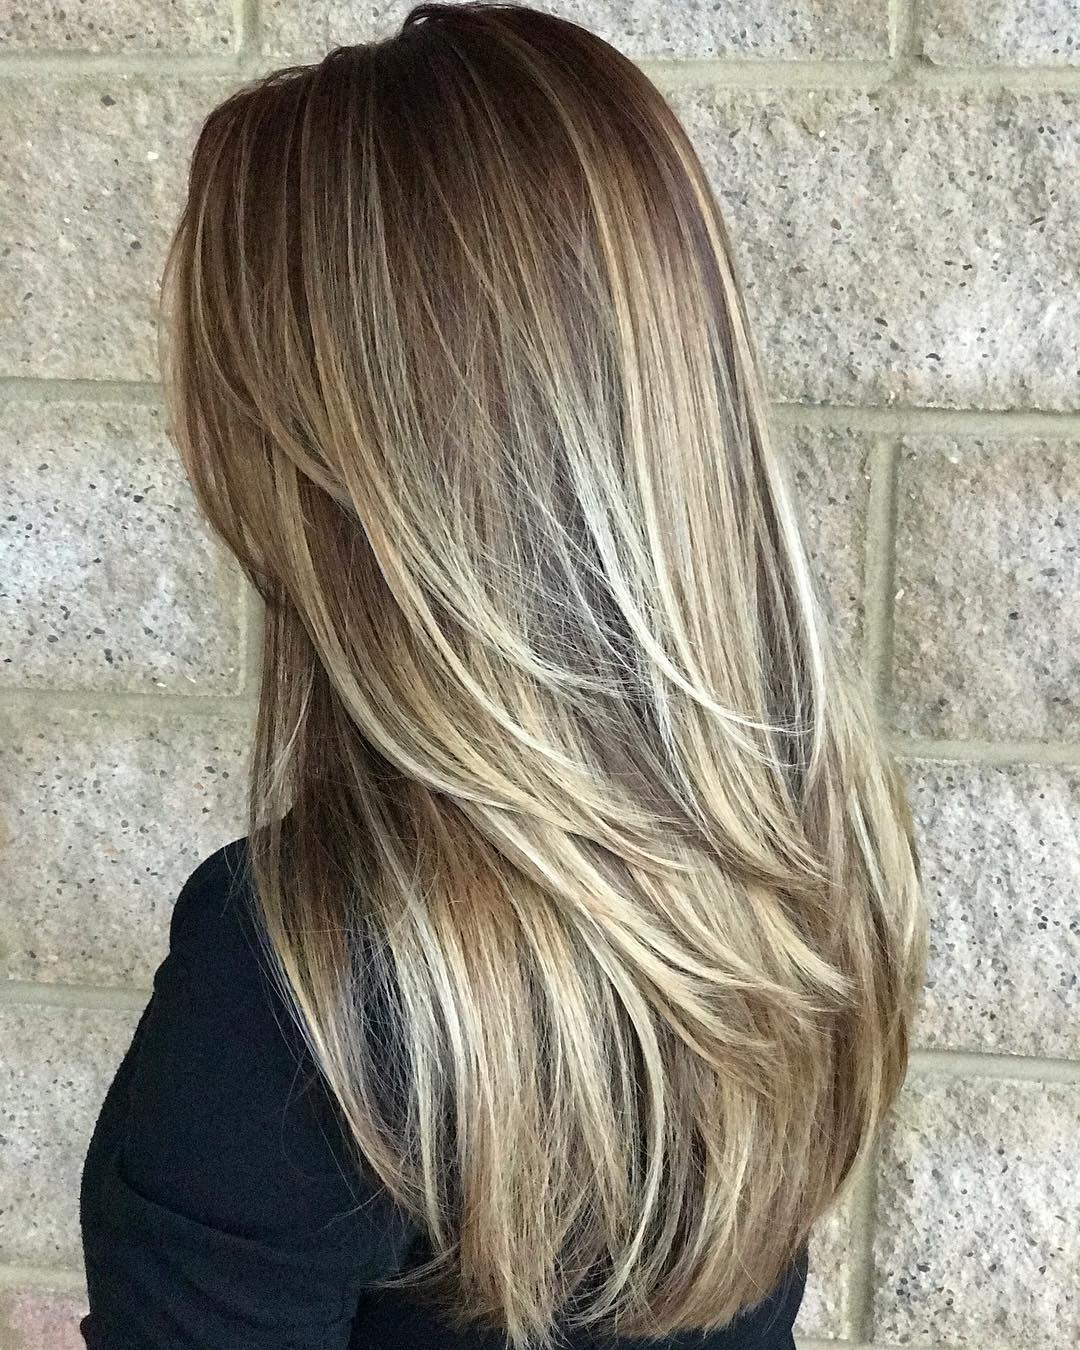 225+ Wonderful long layered hair ideas You Must Consider Trying Human